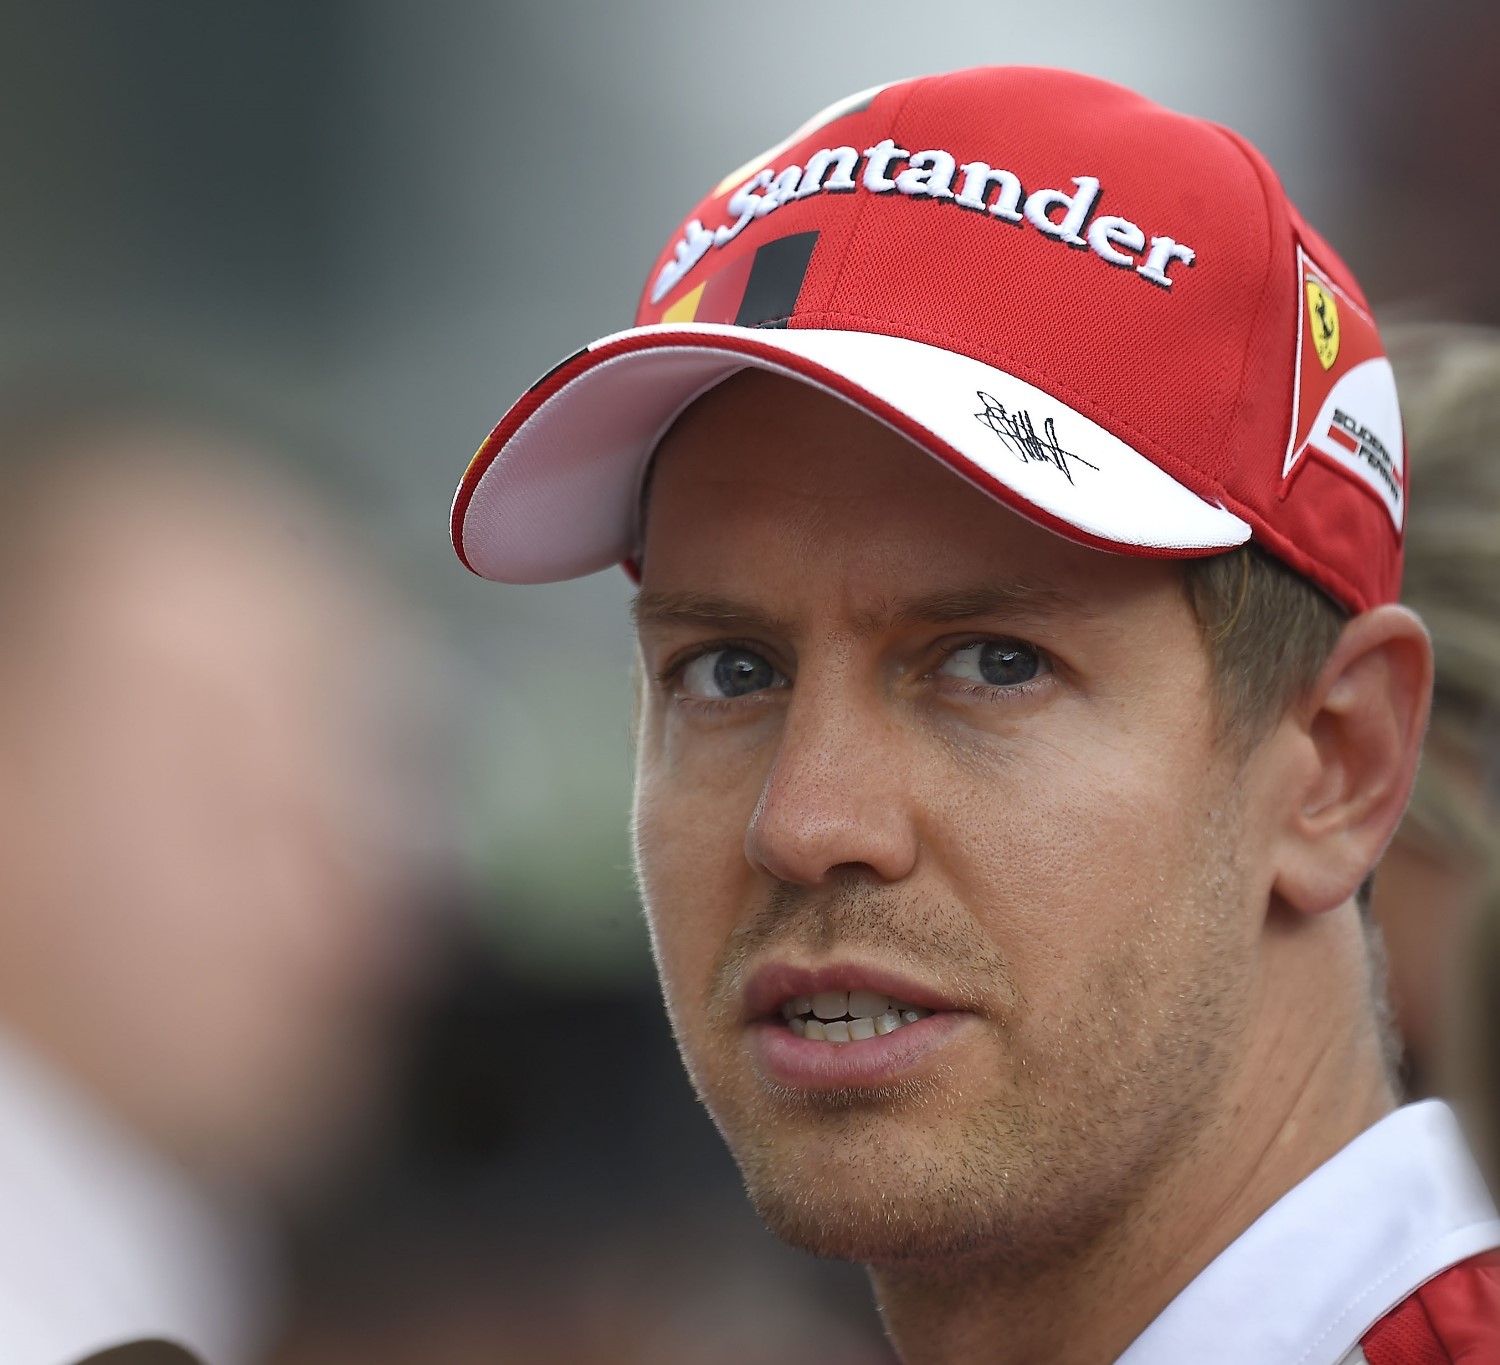 Ecclestone is right, Raikkonen never had to yield to Vettel, while Bottas was clearly Hamilton's 'bitch'